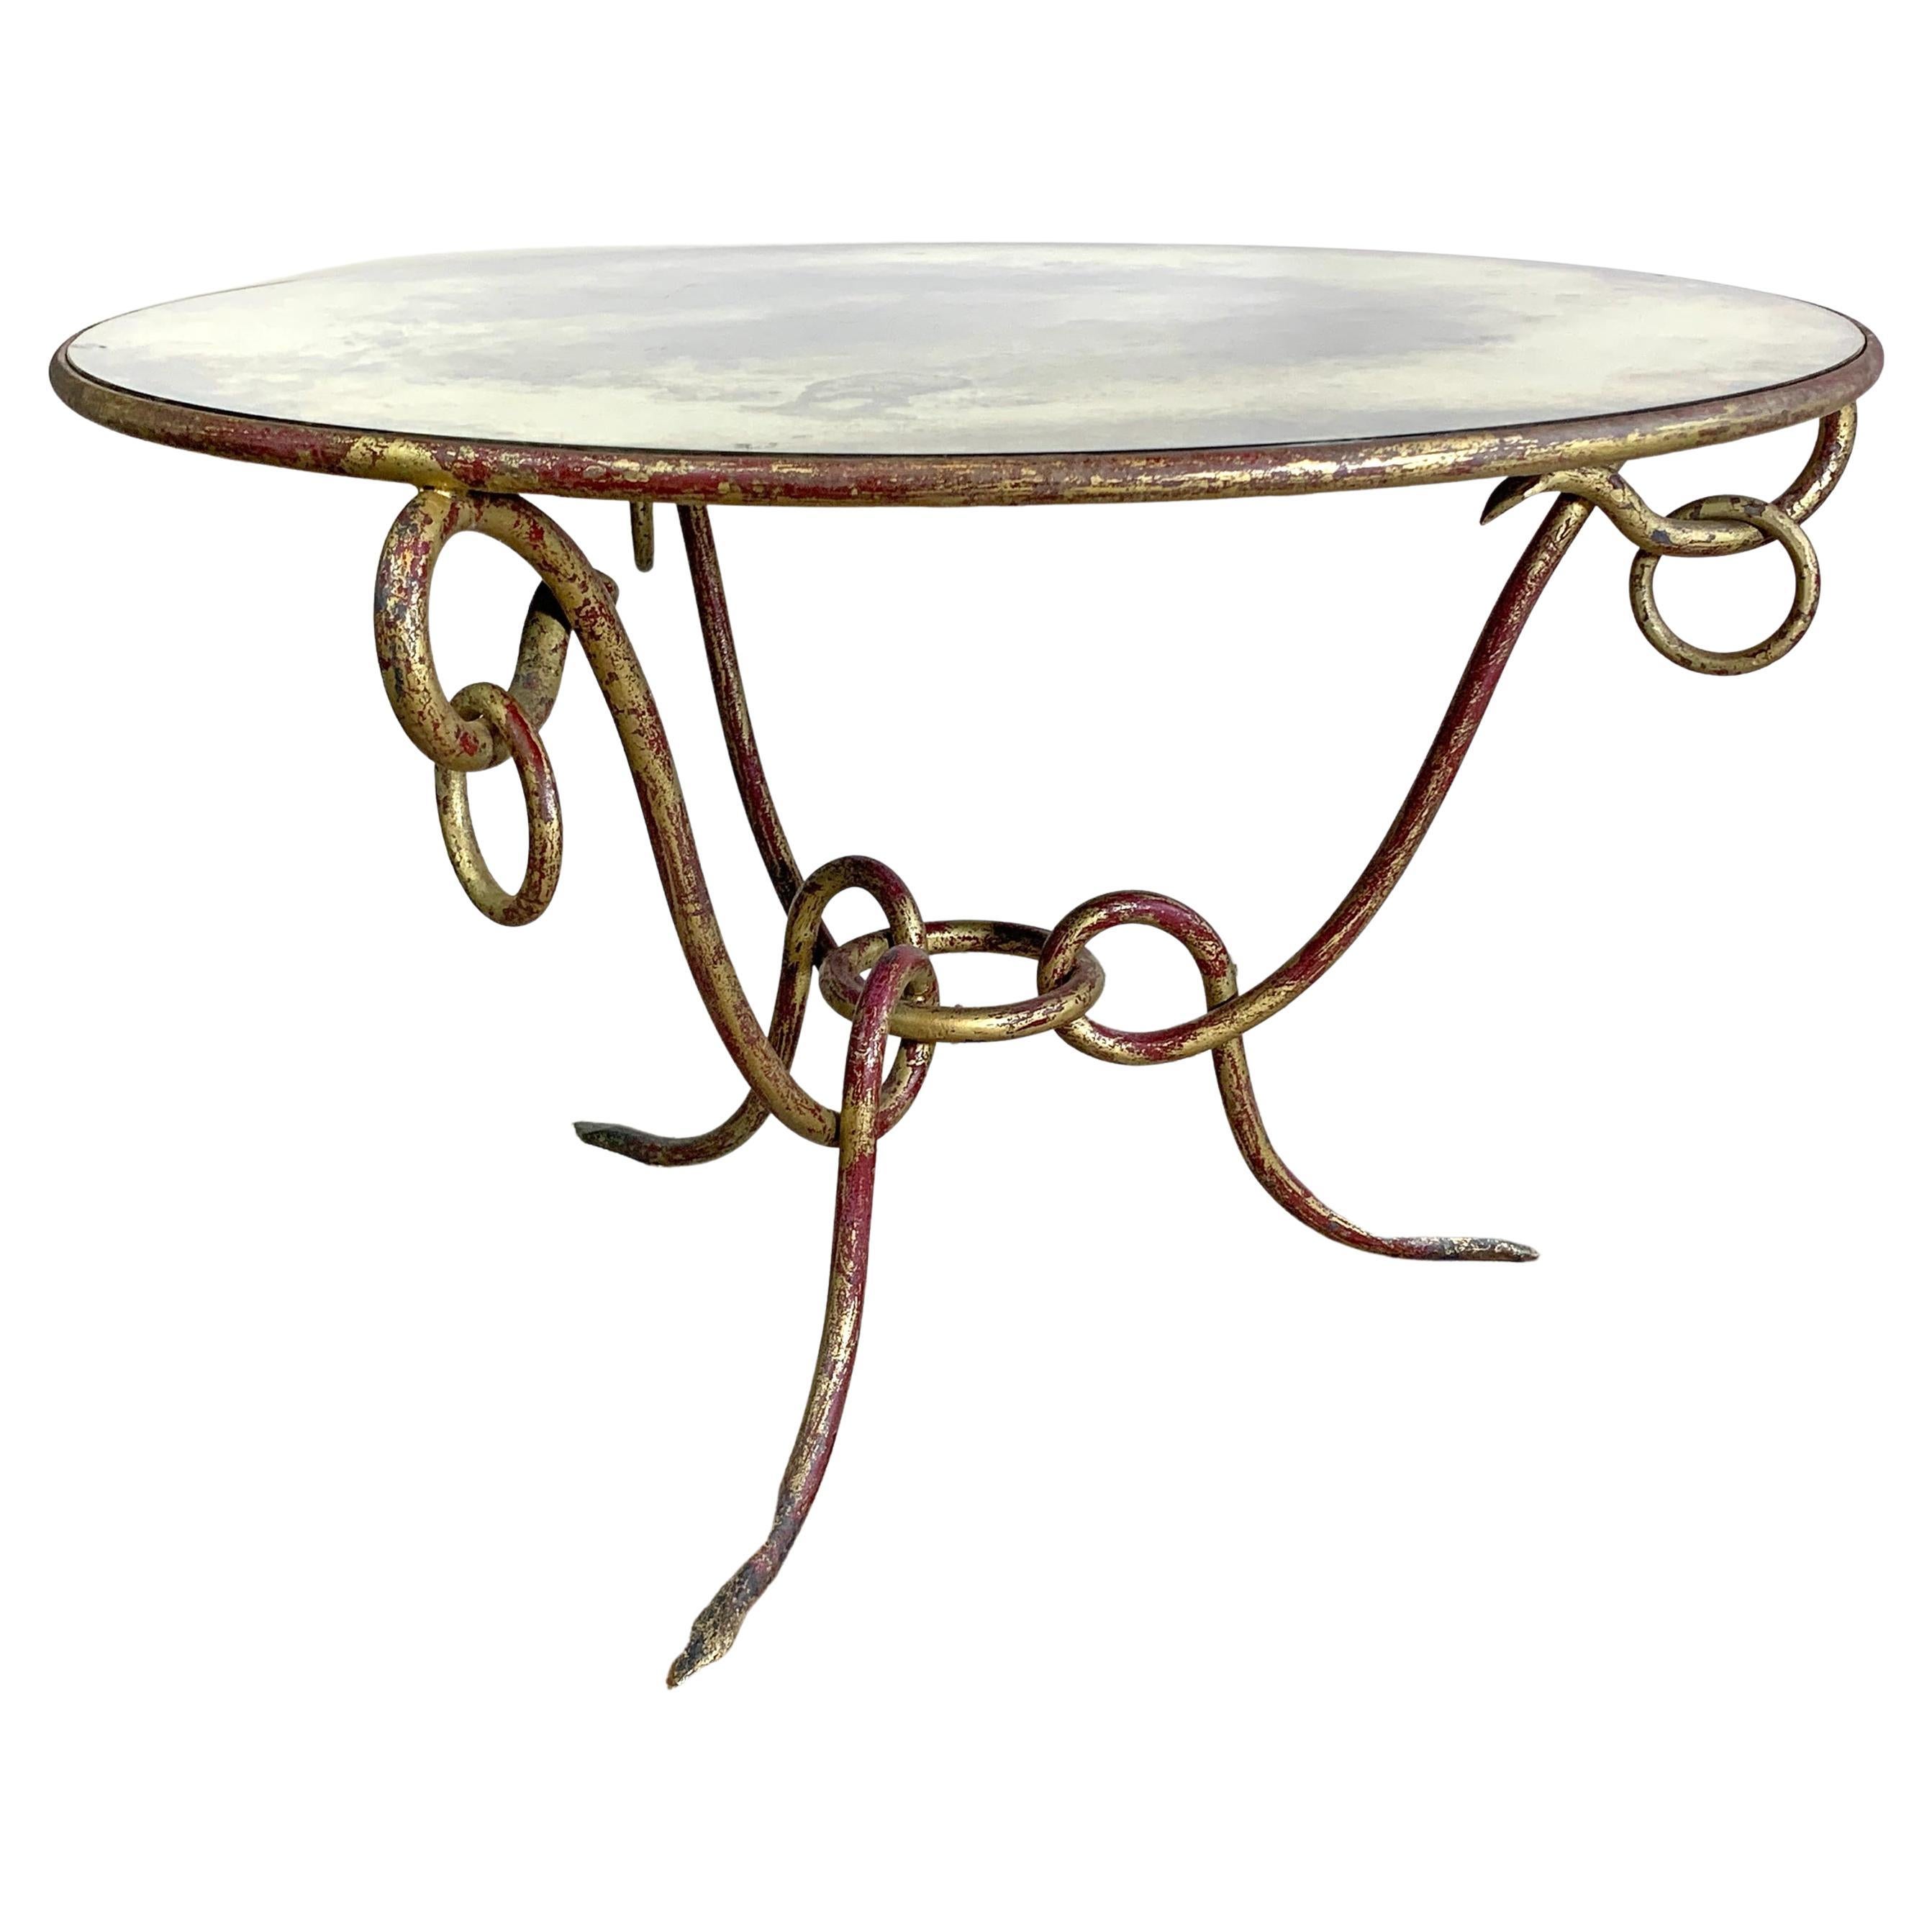 French Wrought Iron Gilt Coffee Table by Rene Drouet, 1940’s